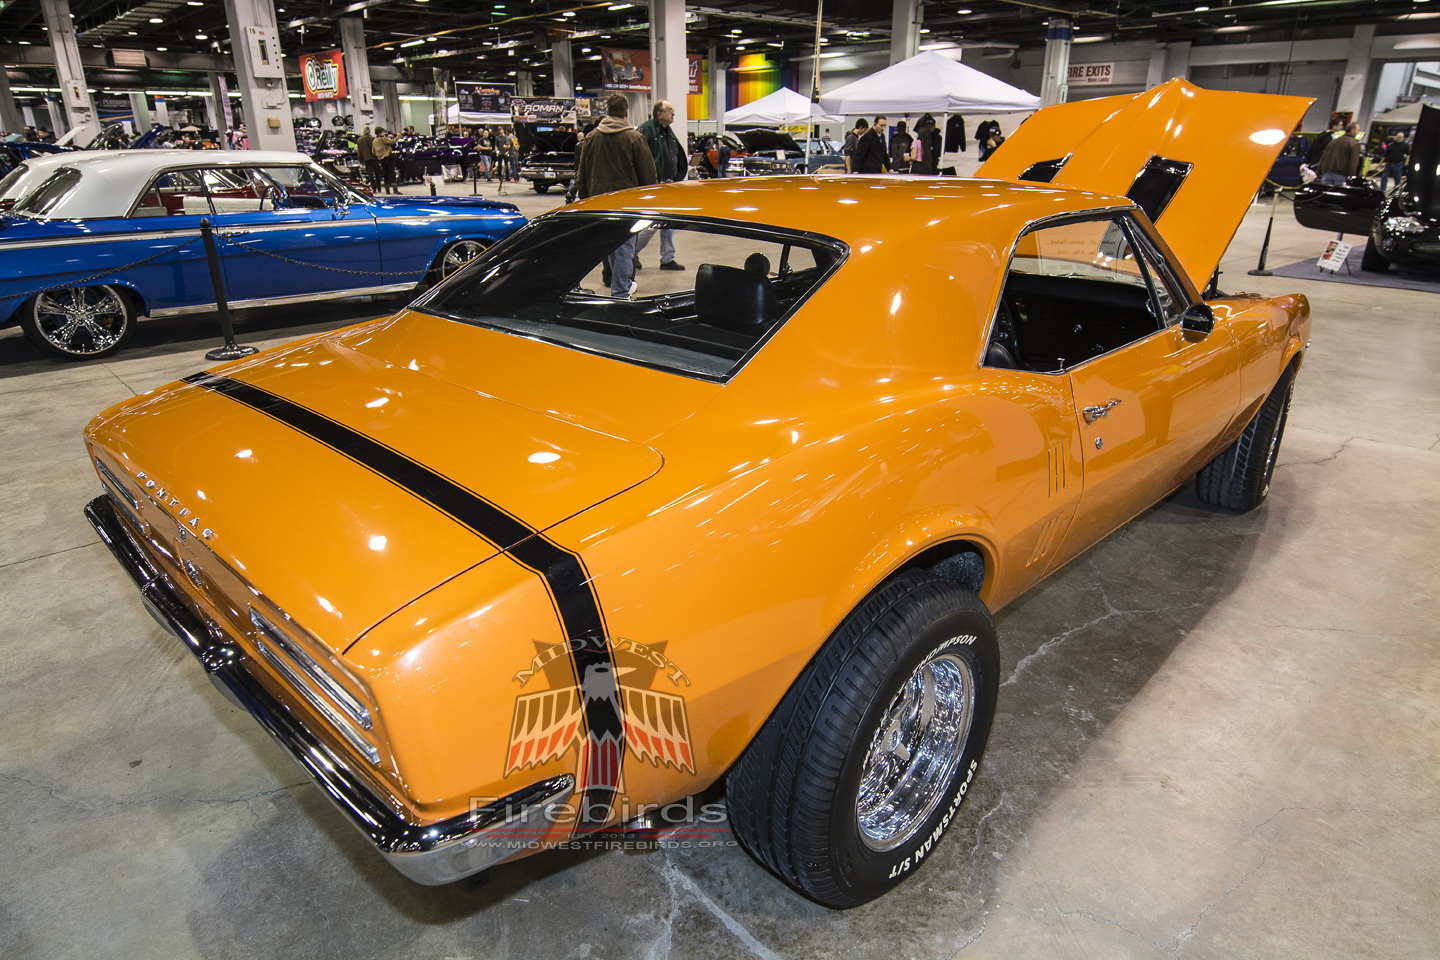 This orange 1967 Pontiac Firebird coupe was on display at the 2014 World of Wheels car show.